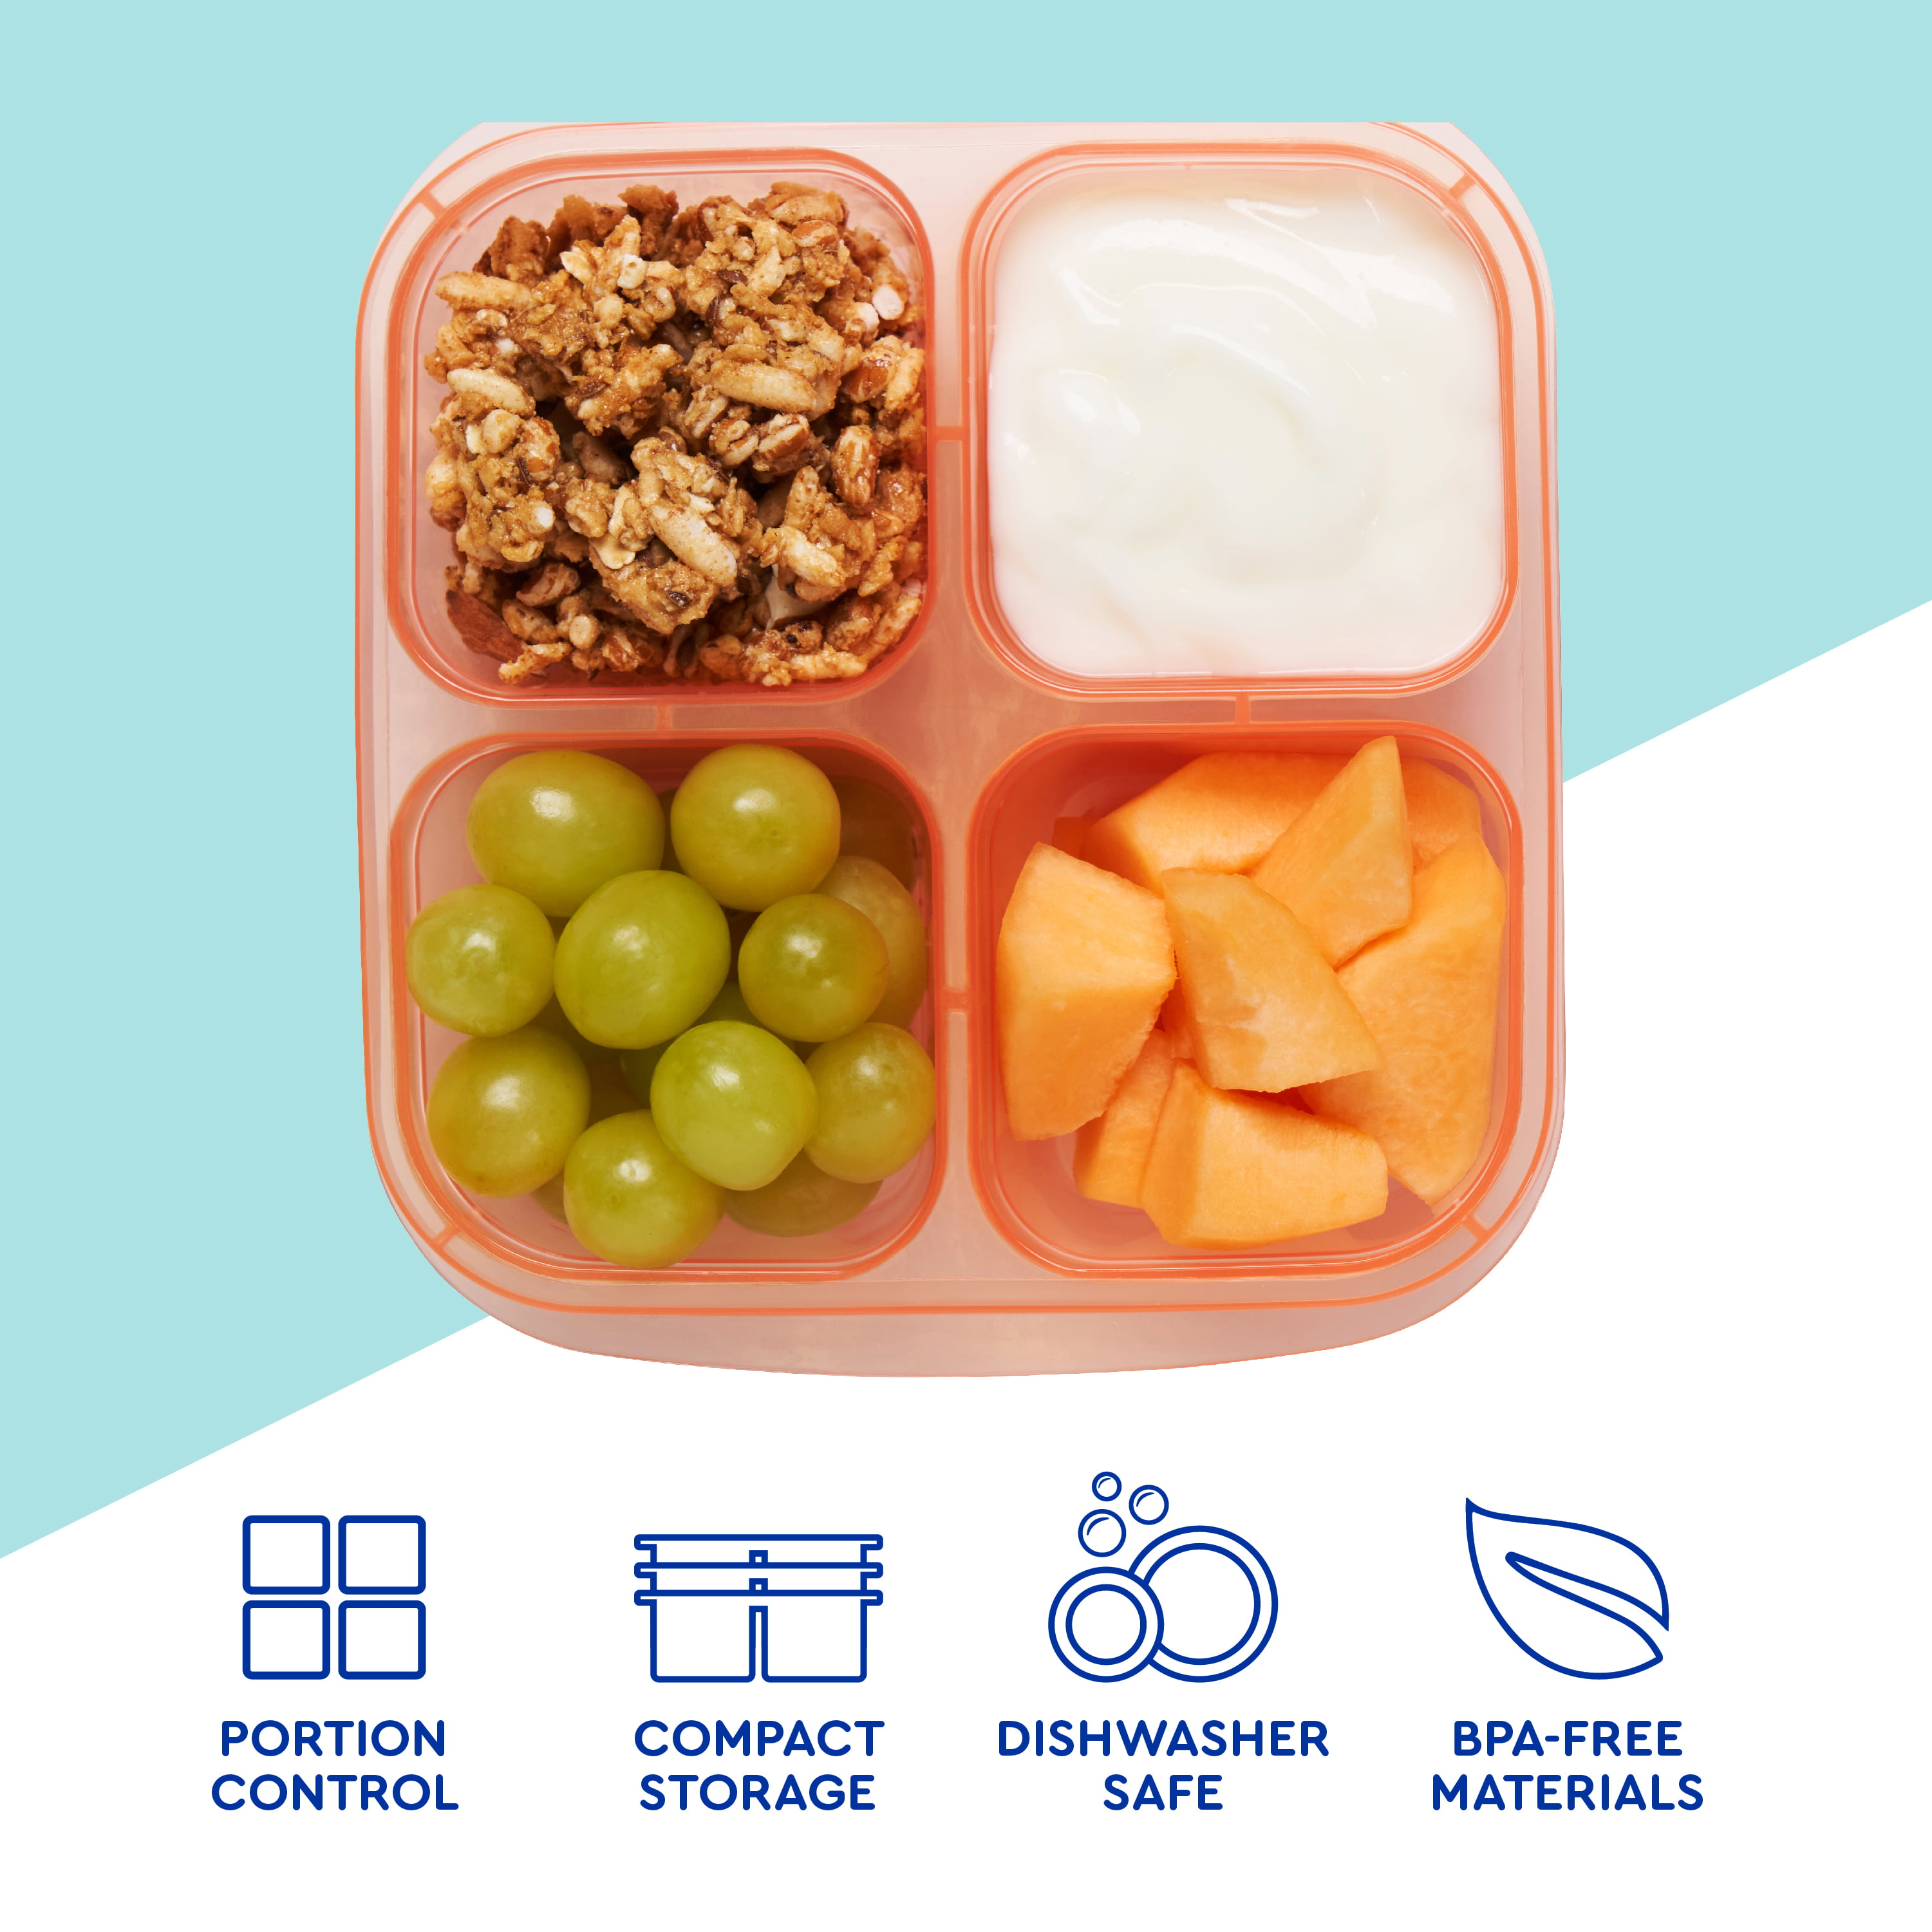 4 Pack Snack Containers, 4 Compartment Divided Snack Container for Kids,  Bento Snack Box for Adults,…See more 4 Pack Snack Containers, 4 Compartment